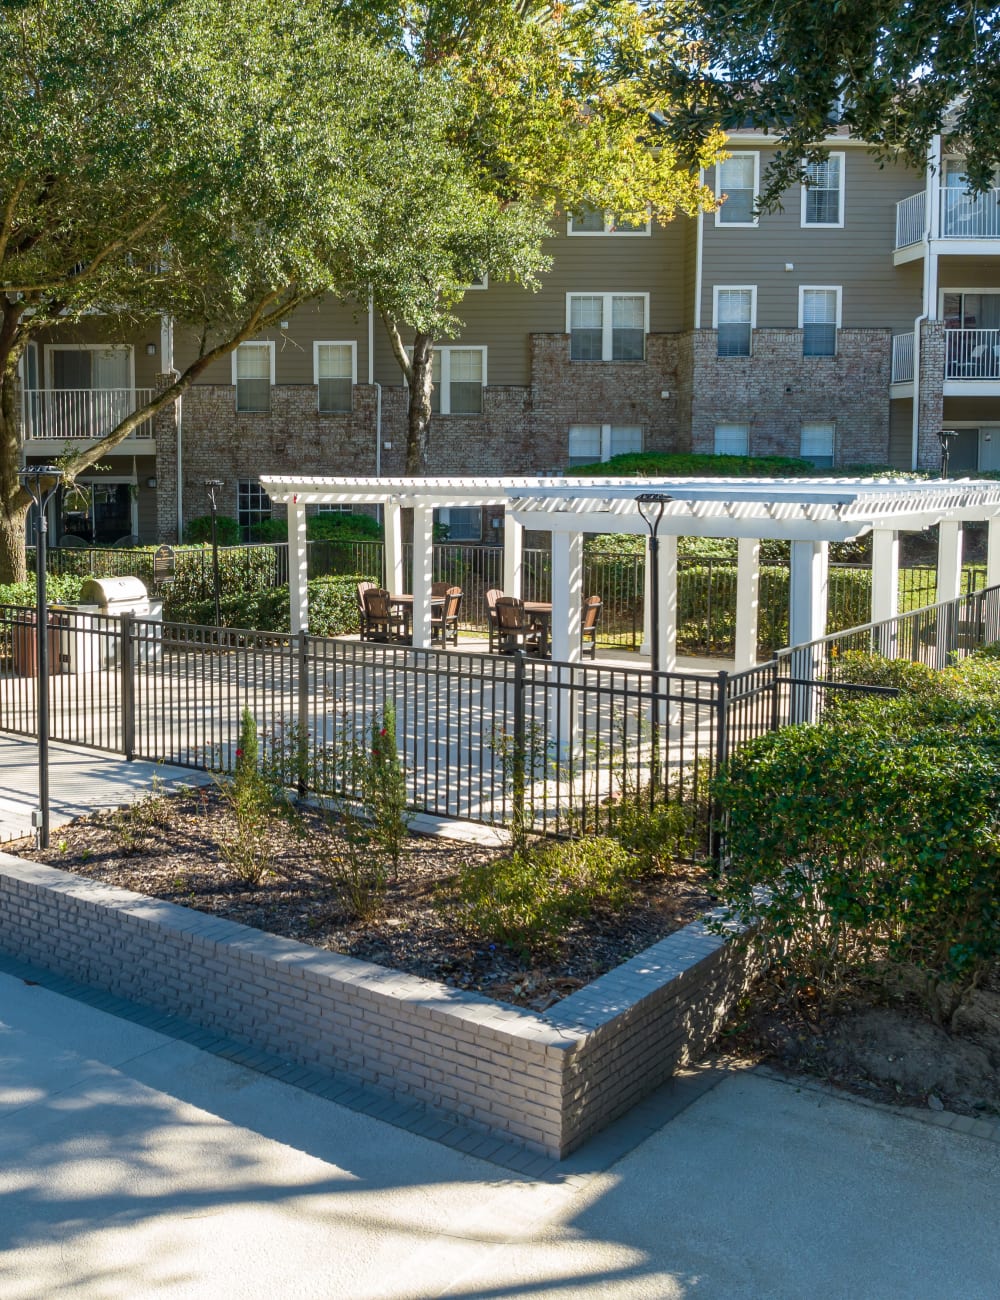 Outdoor community grill beside the pool deck at Regency Gates in Mobile, Alabama